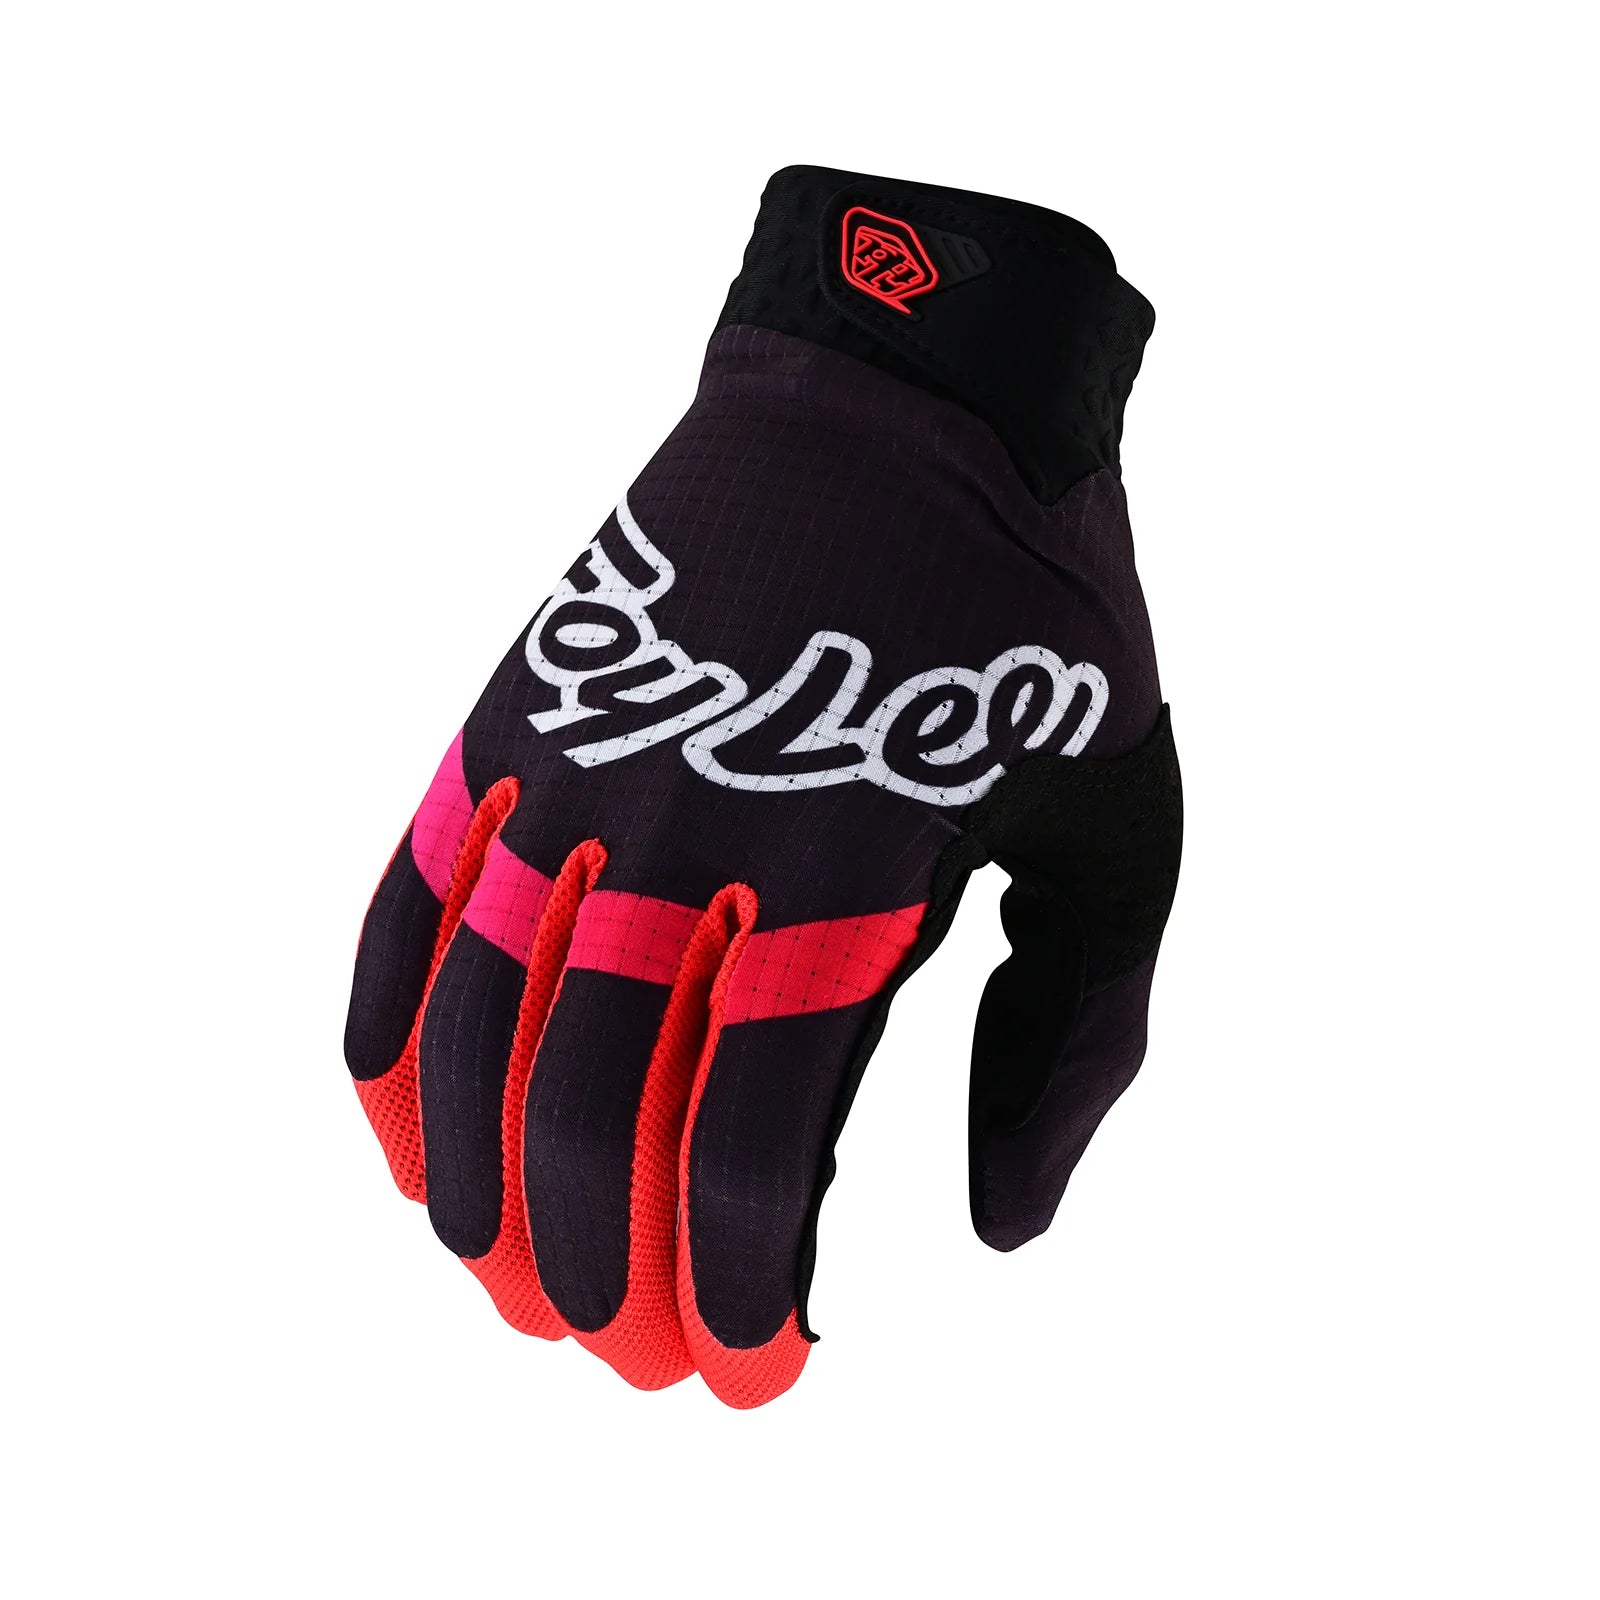 A single black and red TLD Air Glove Pinned Black with a single-layer perforated palm, isolated on a white background.